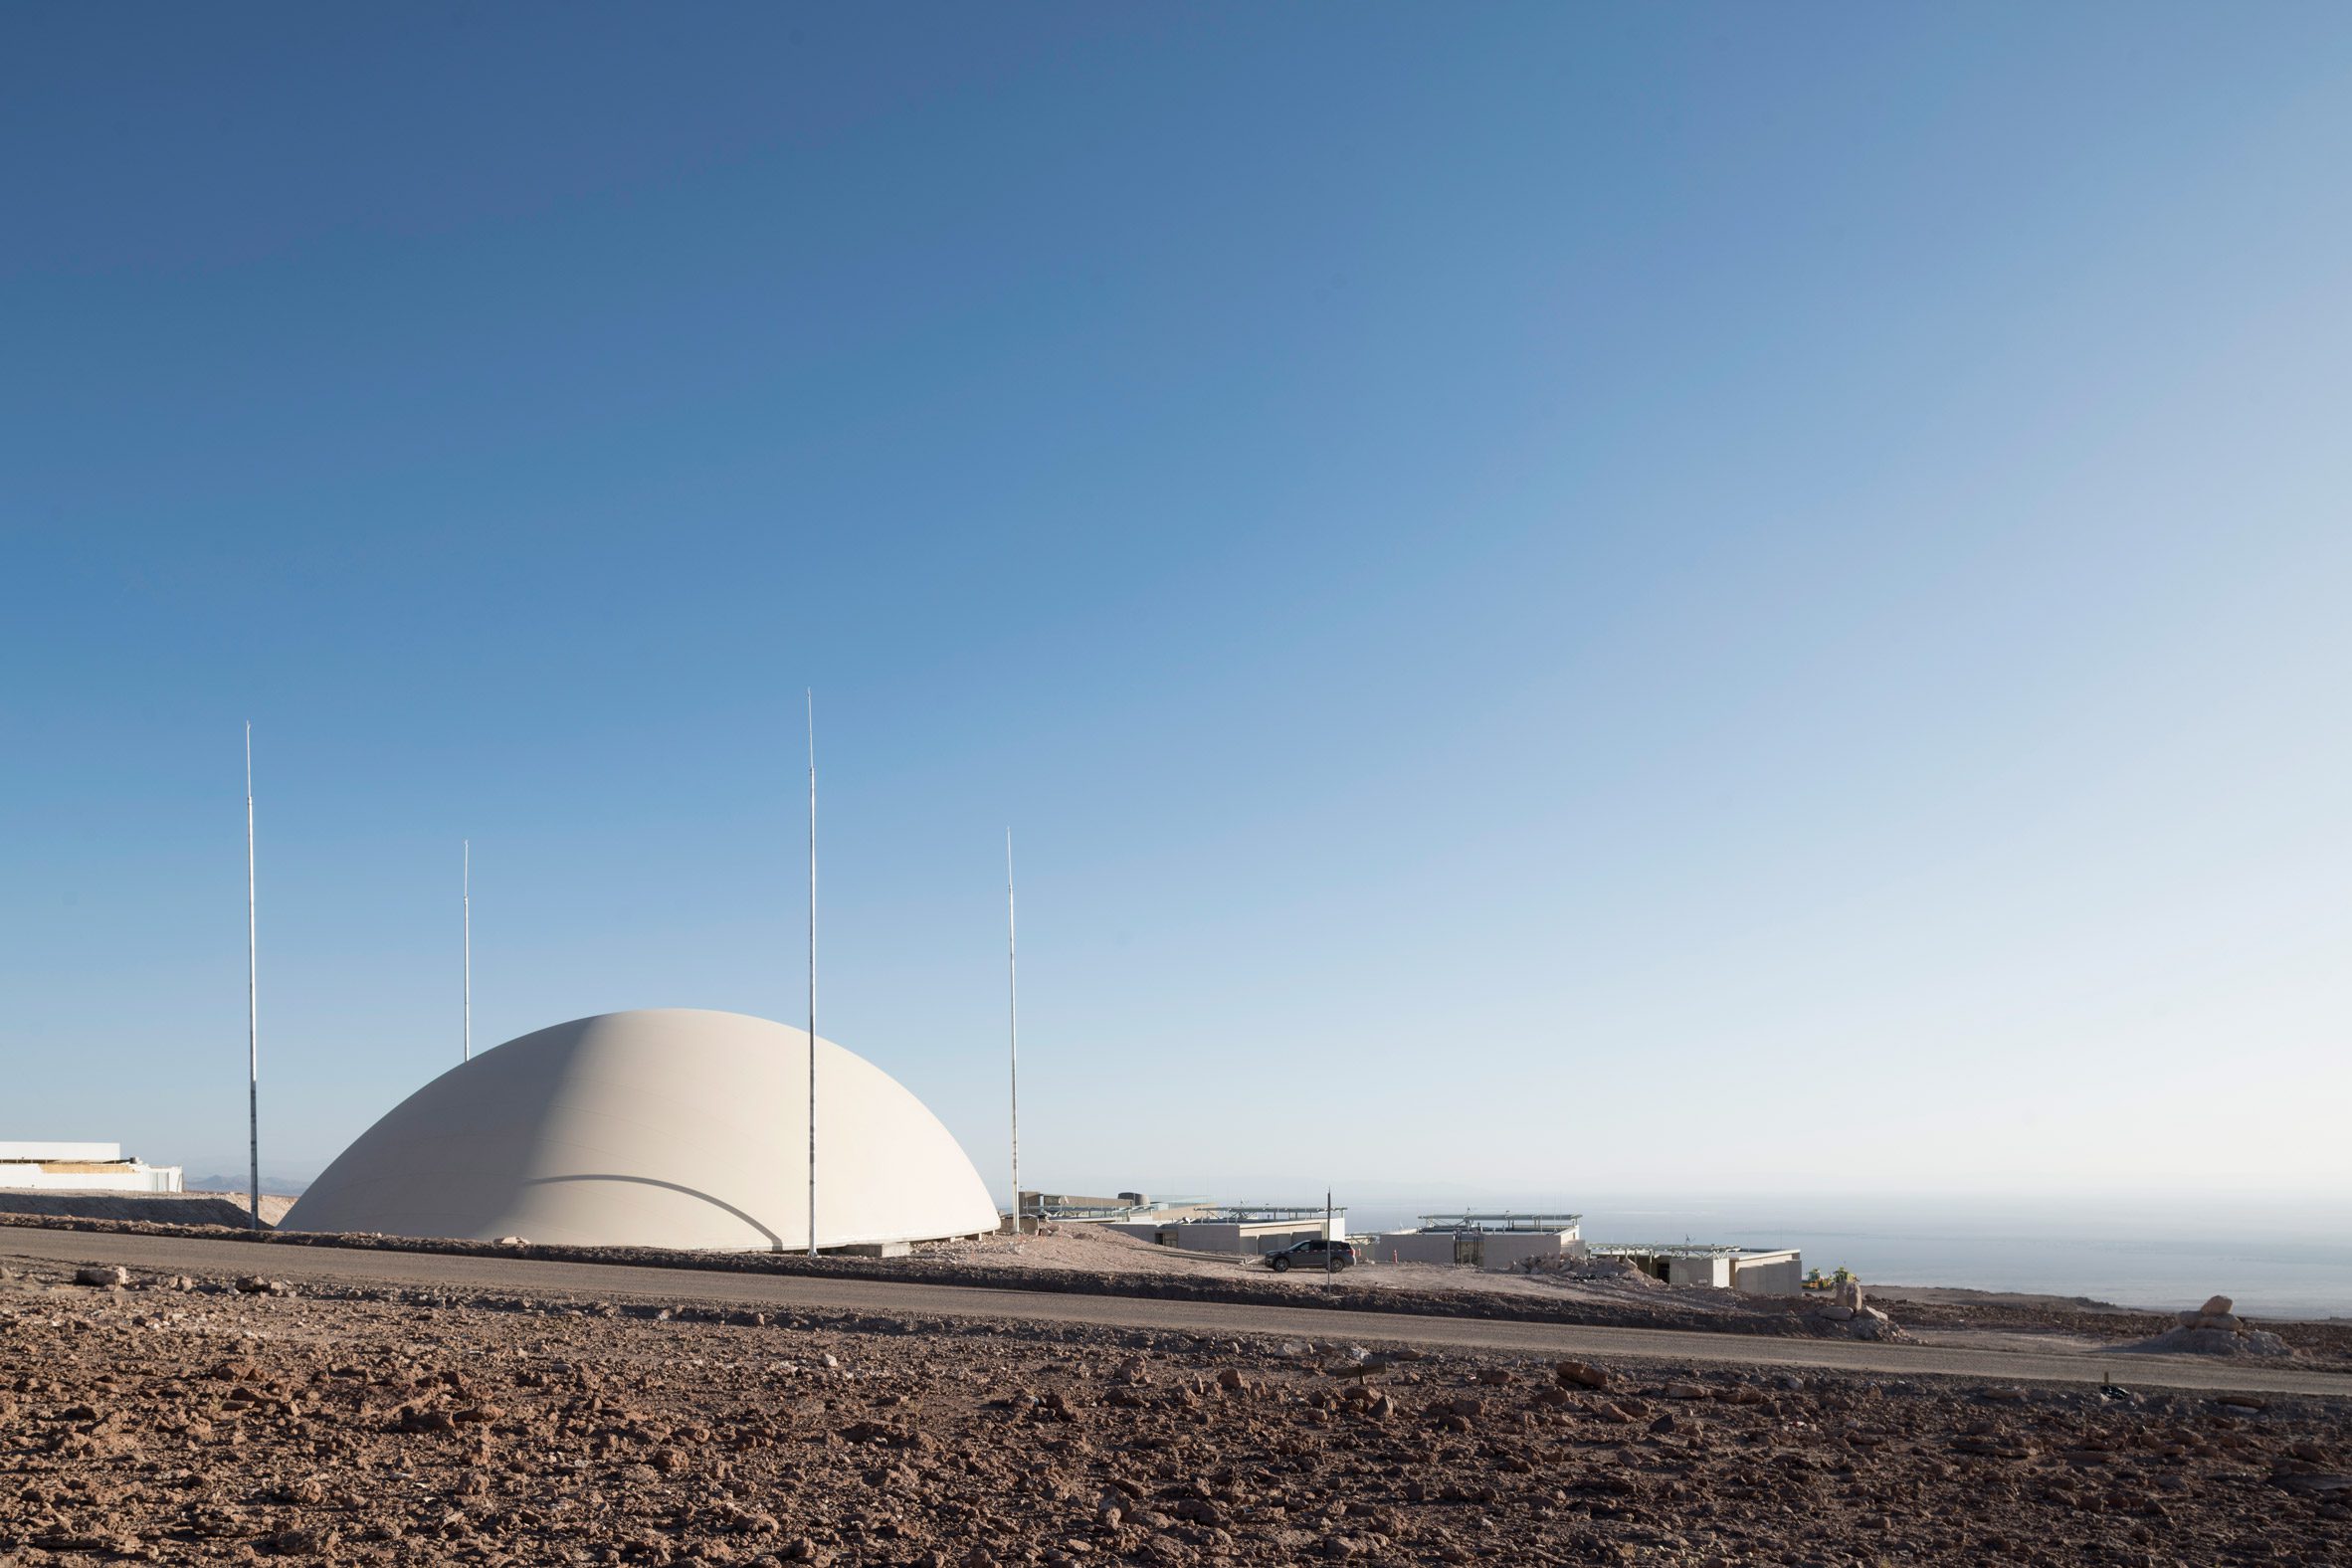 A domed sports facility overlooking the desert in Chile